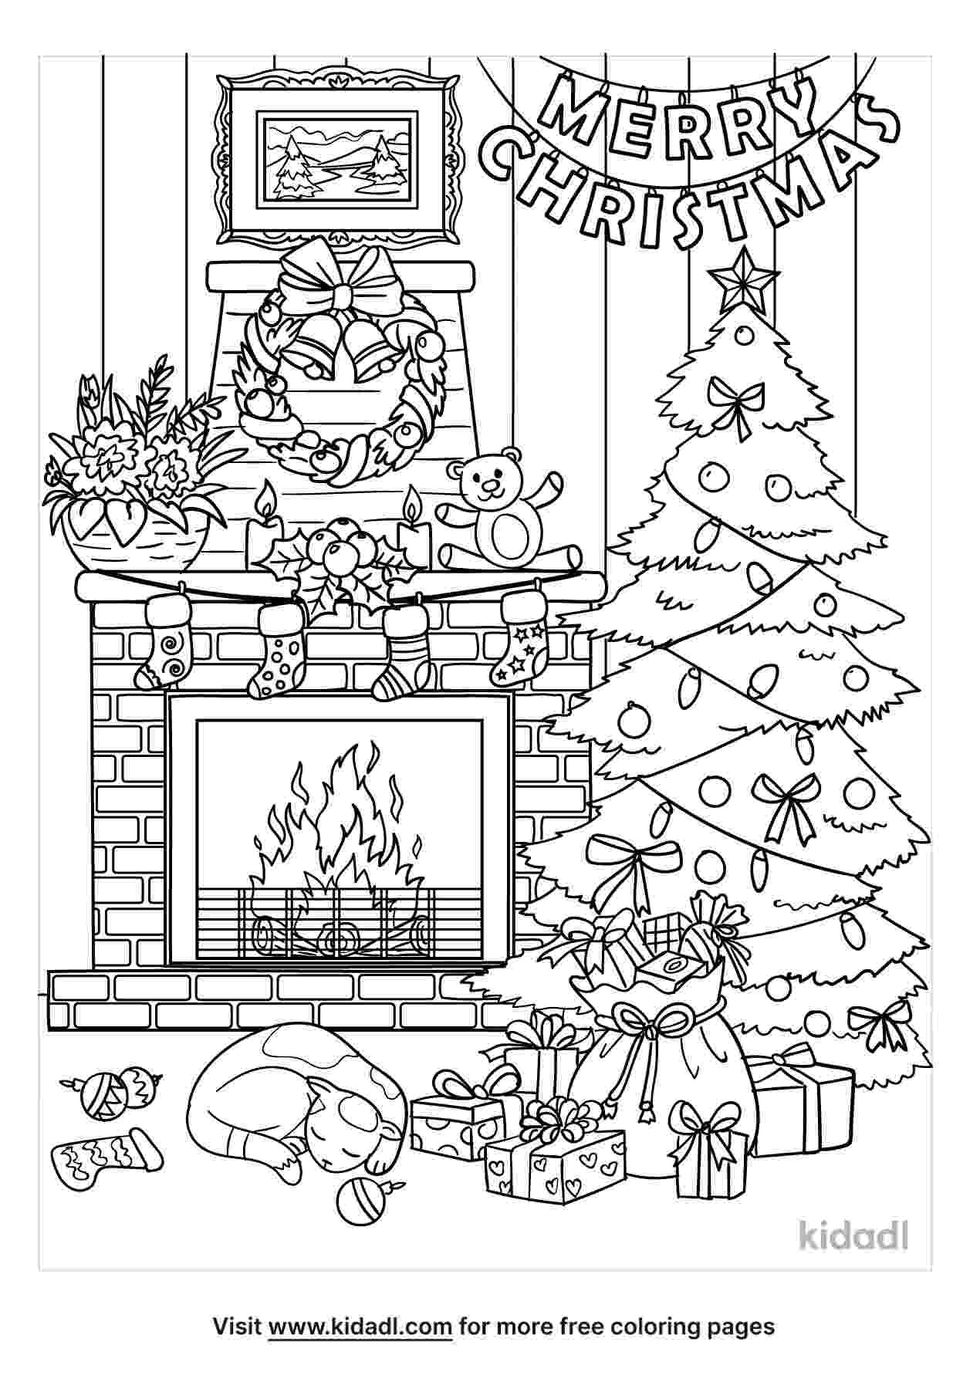 Christmas tree with gifts drawing and coloring page.